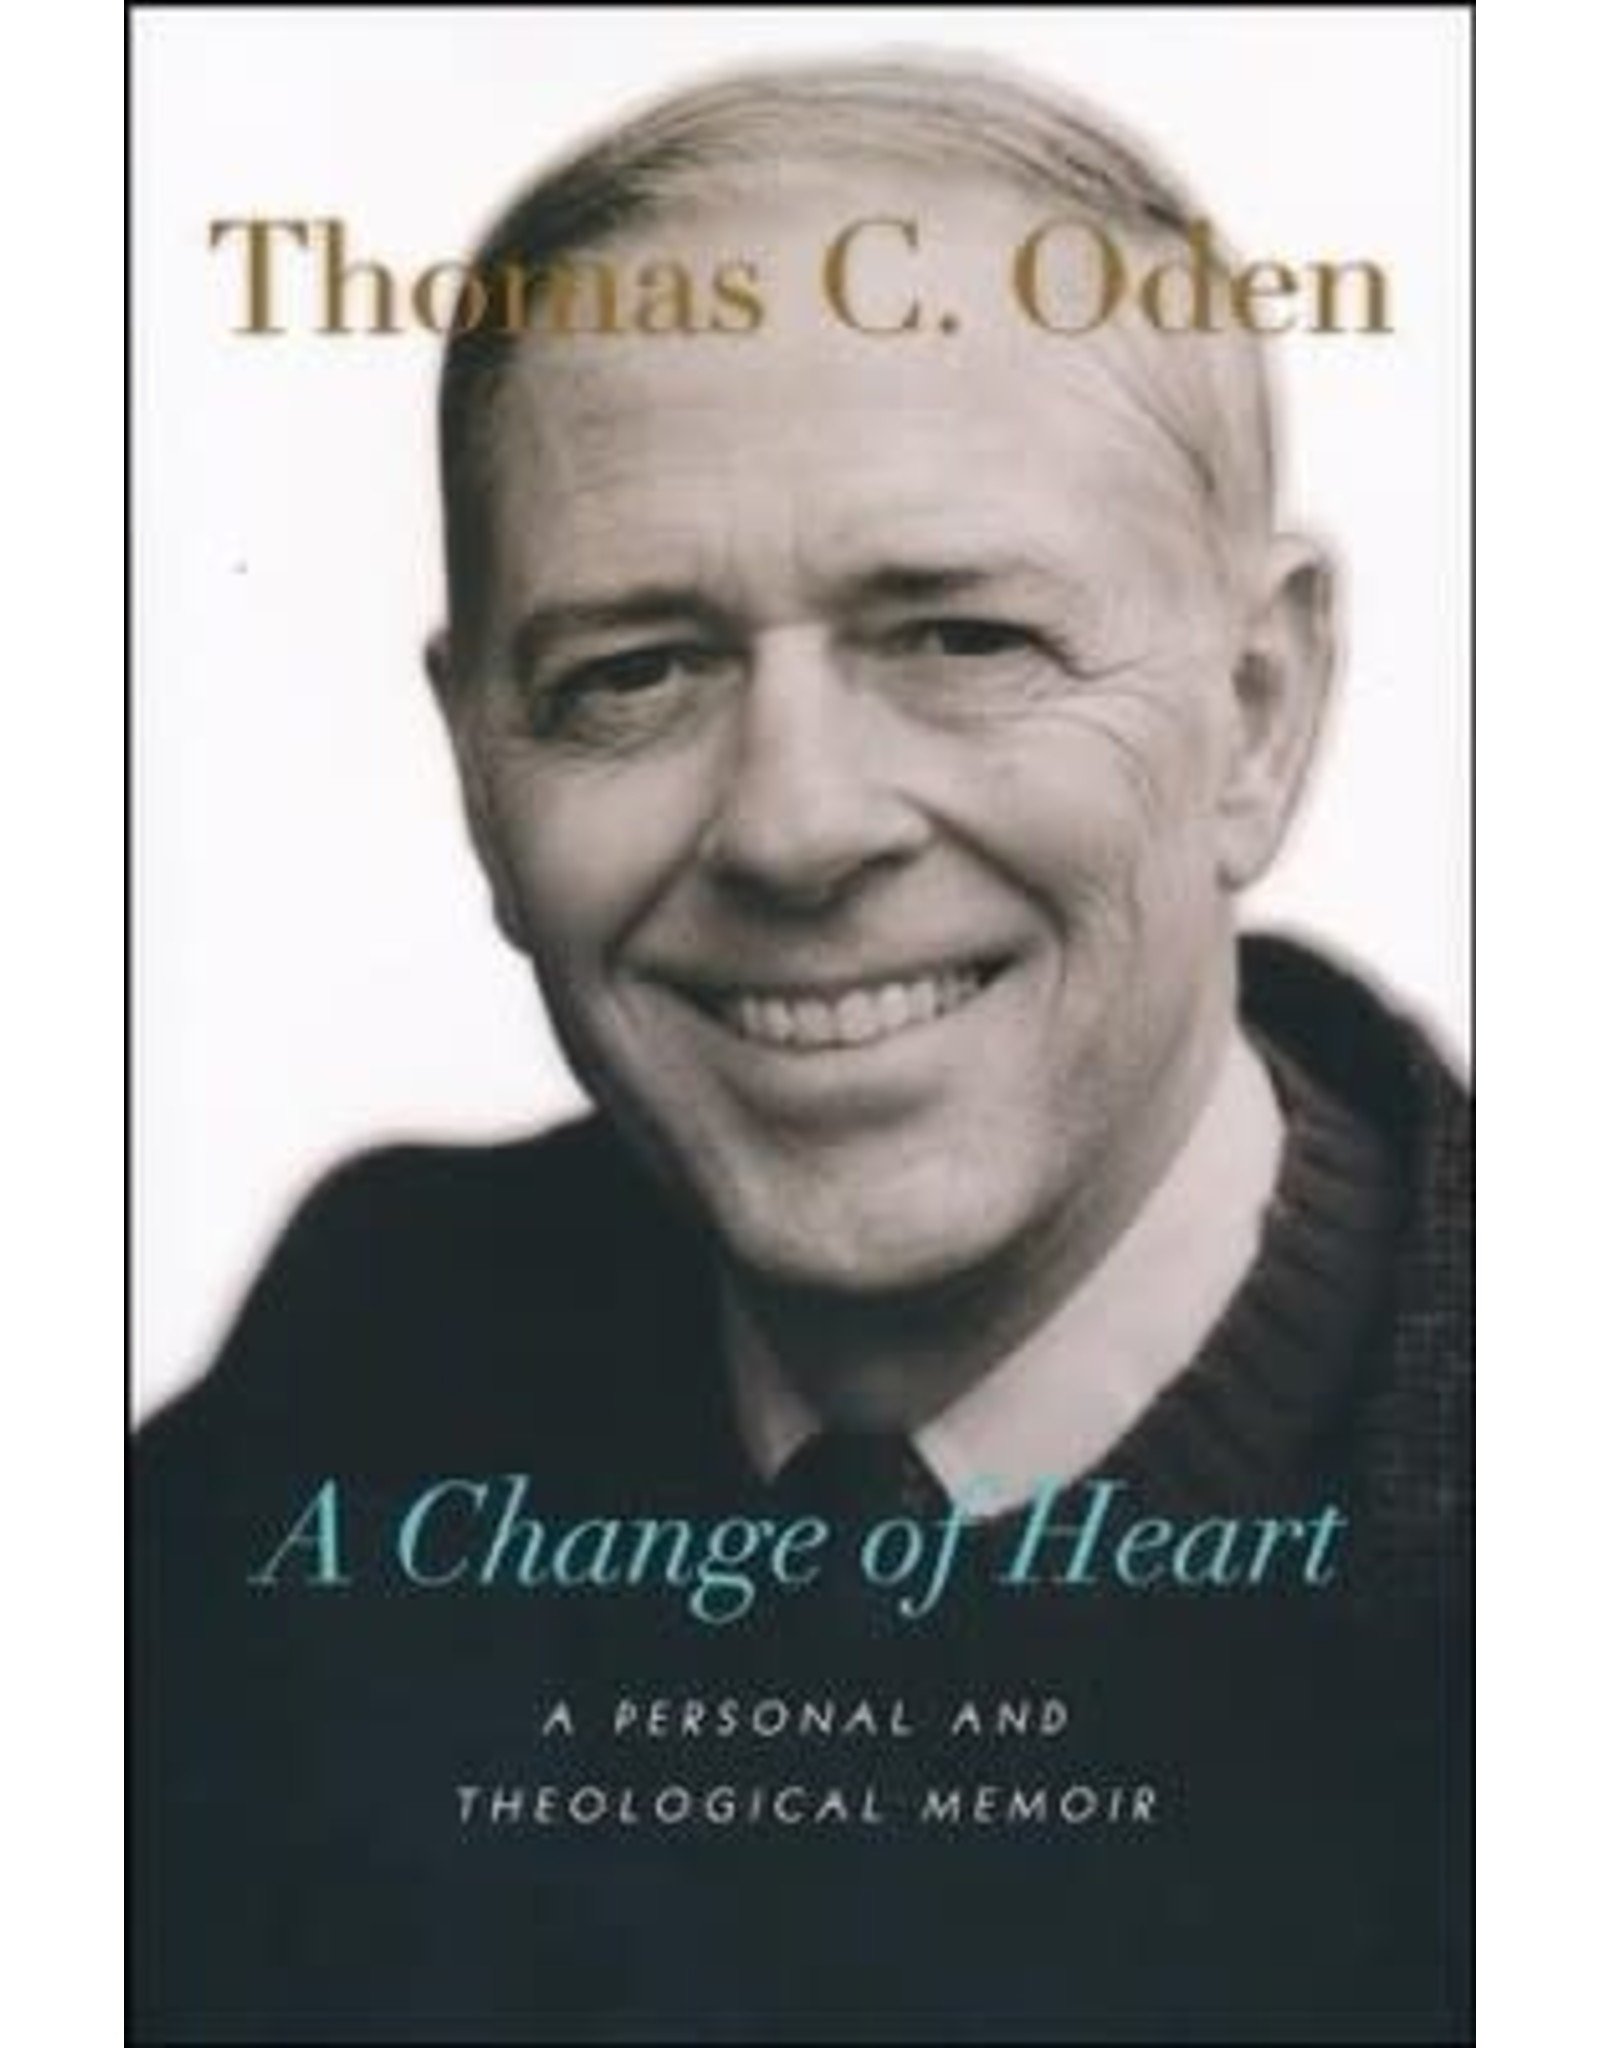 InterVarsity Press (IVP) A Change of Heart: A Personal and Theological Memoir